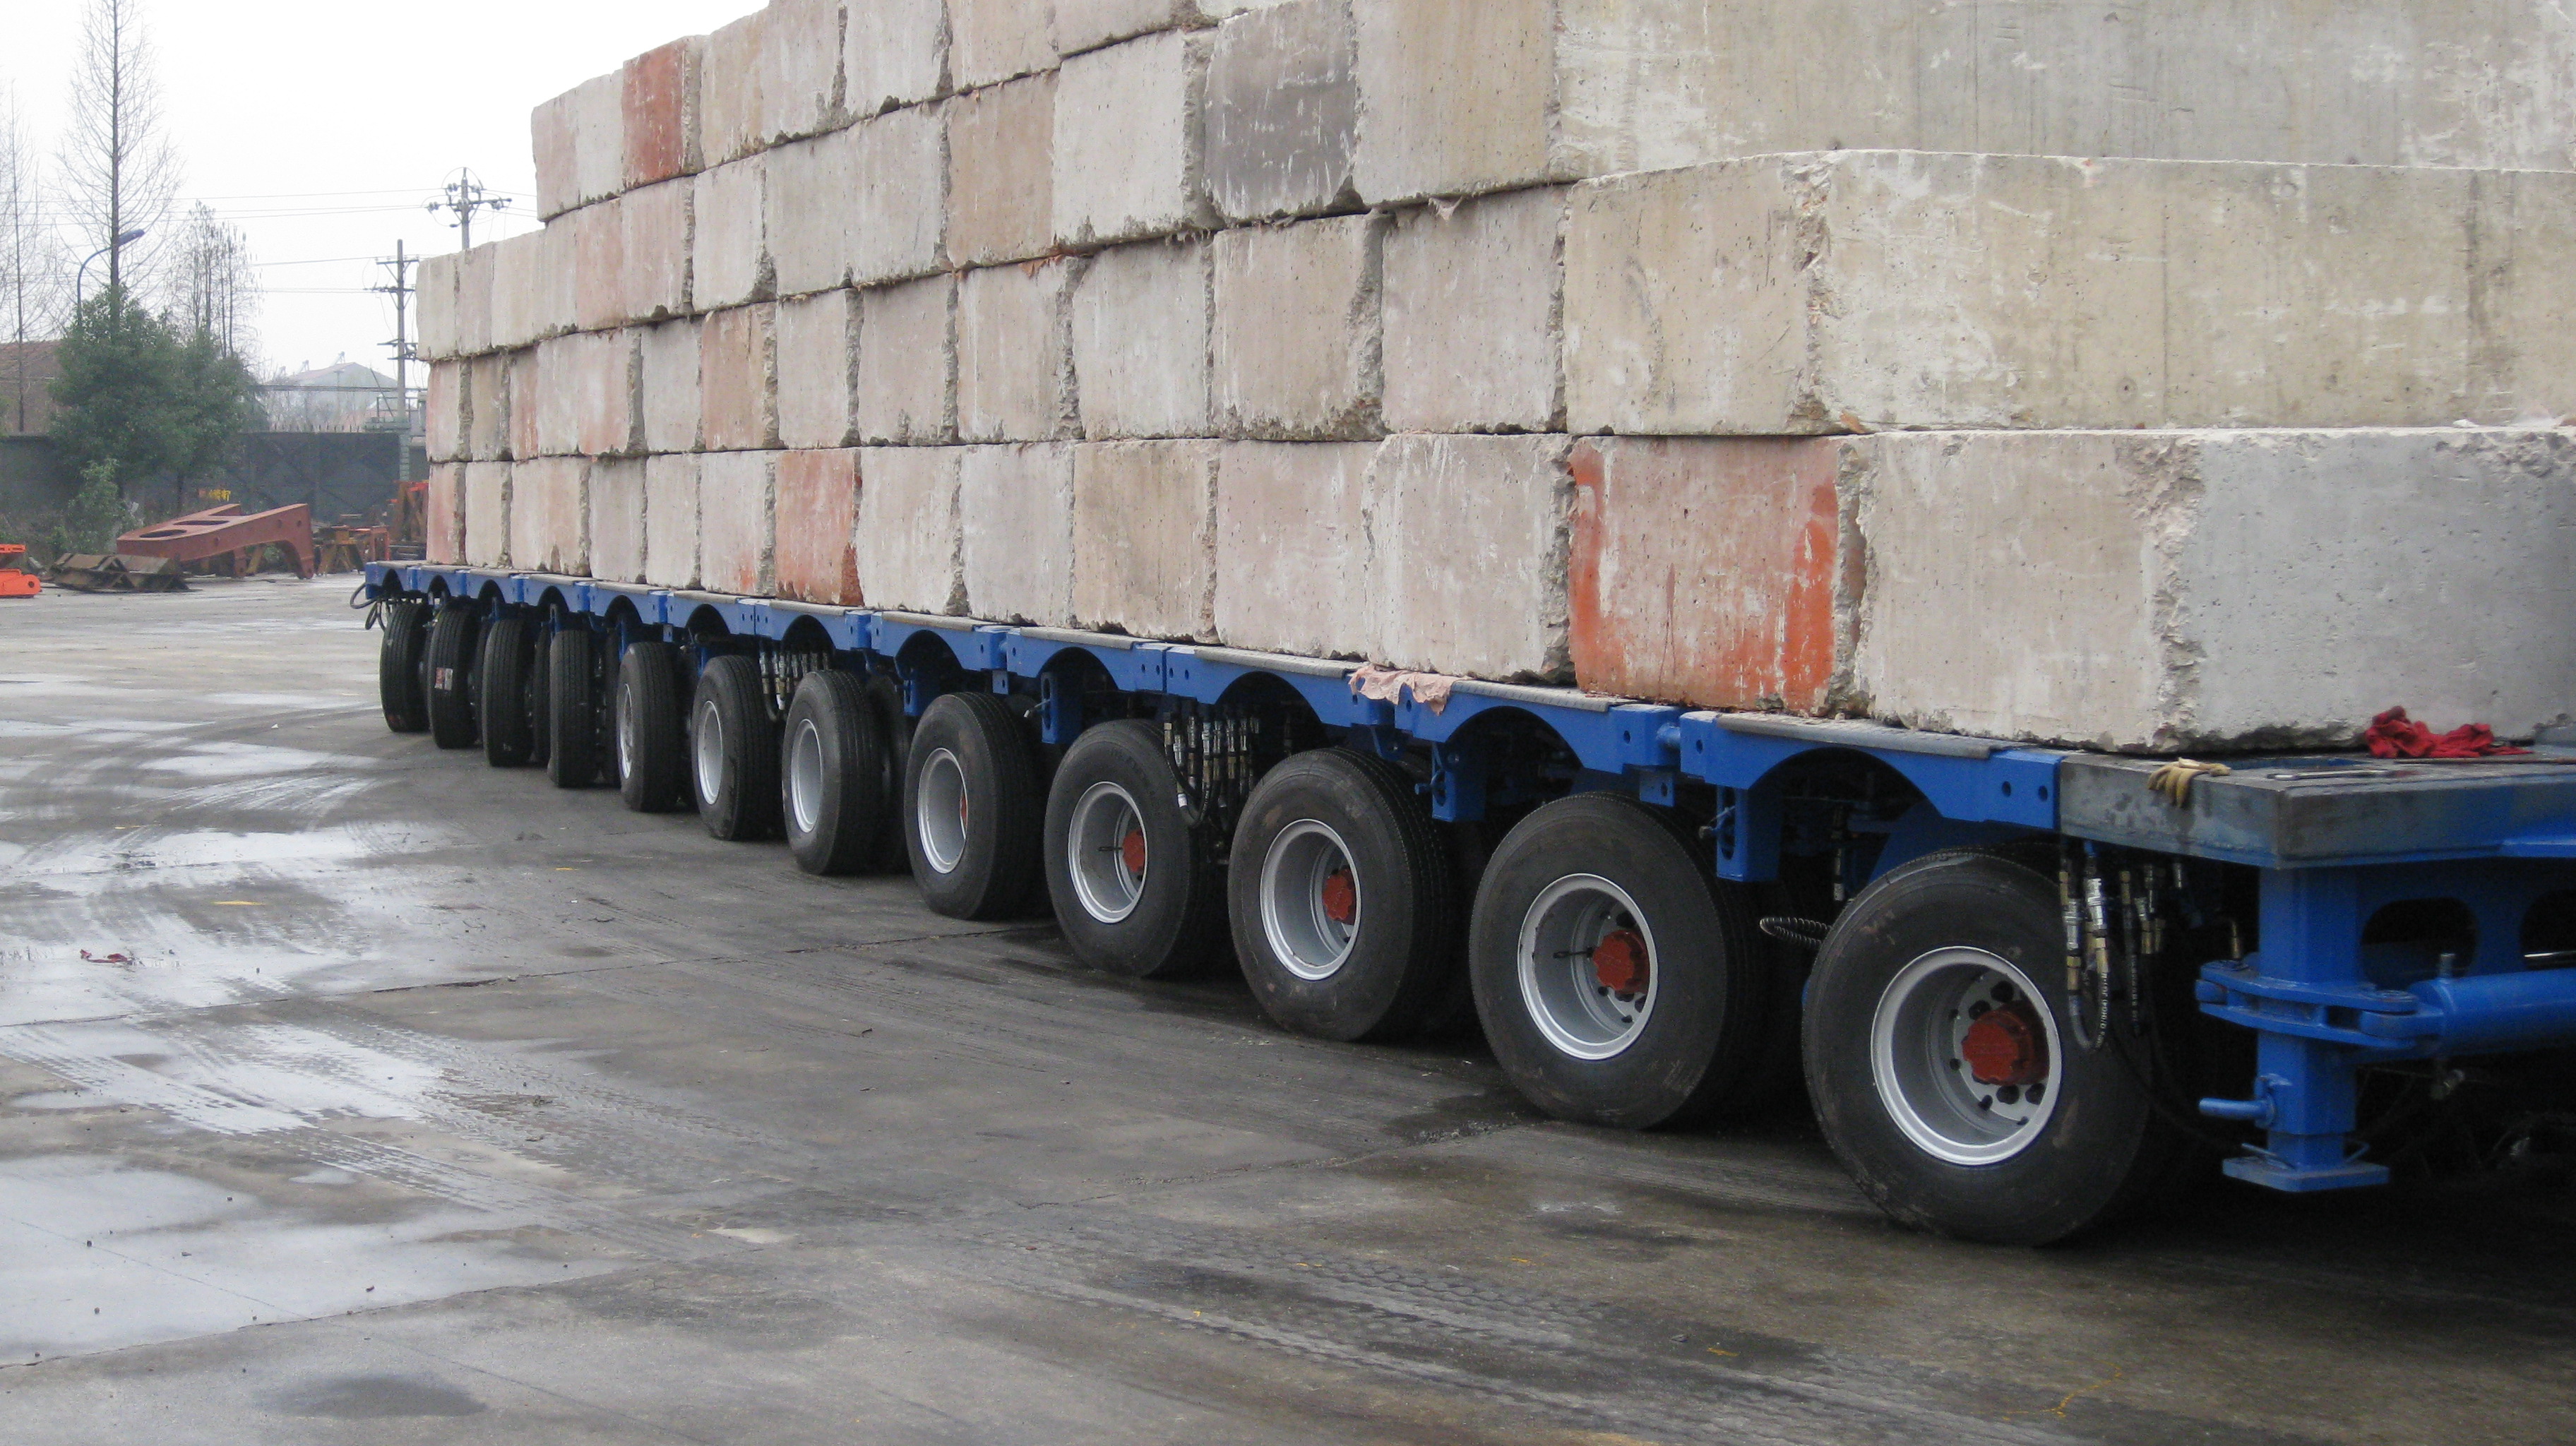 The Commissioning Transport by multi axle modular trailer